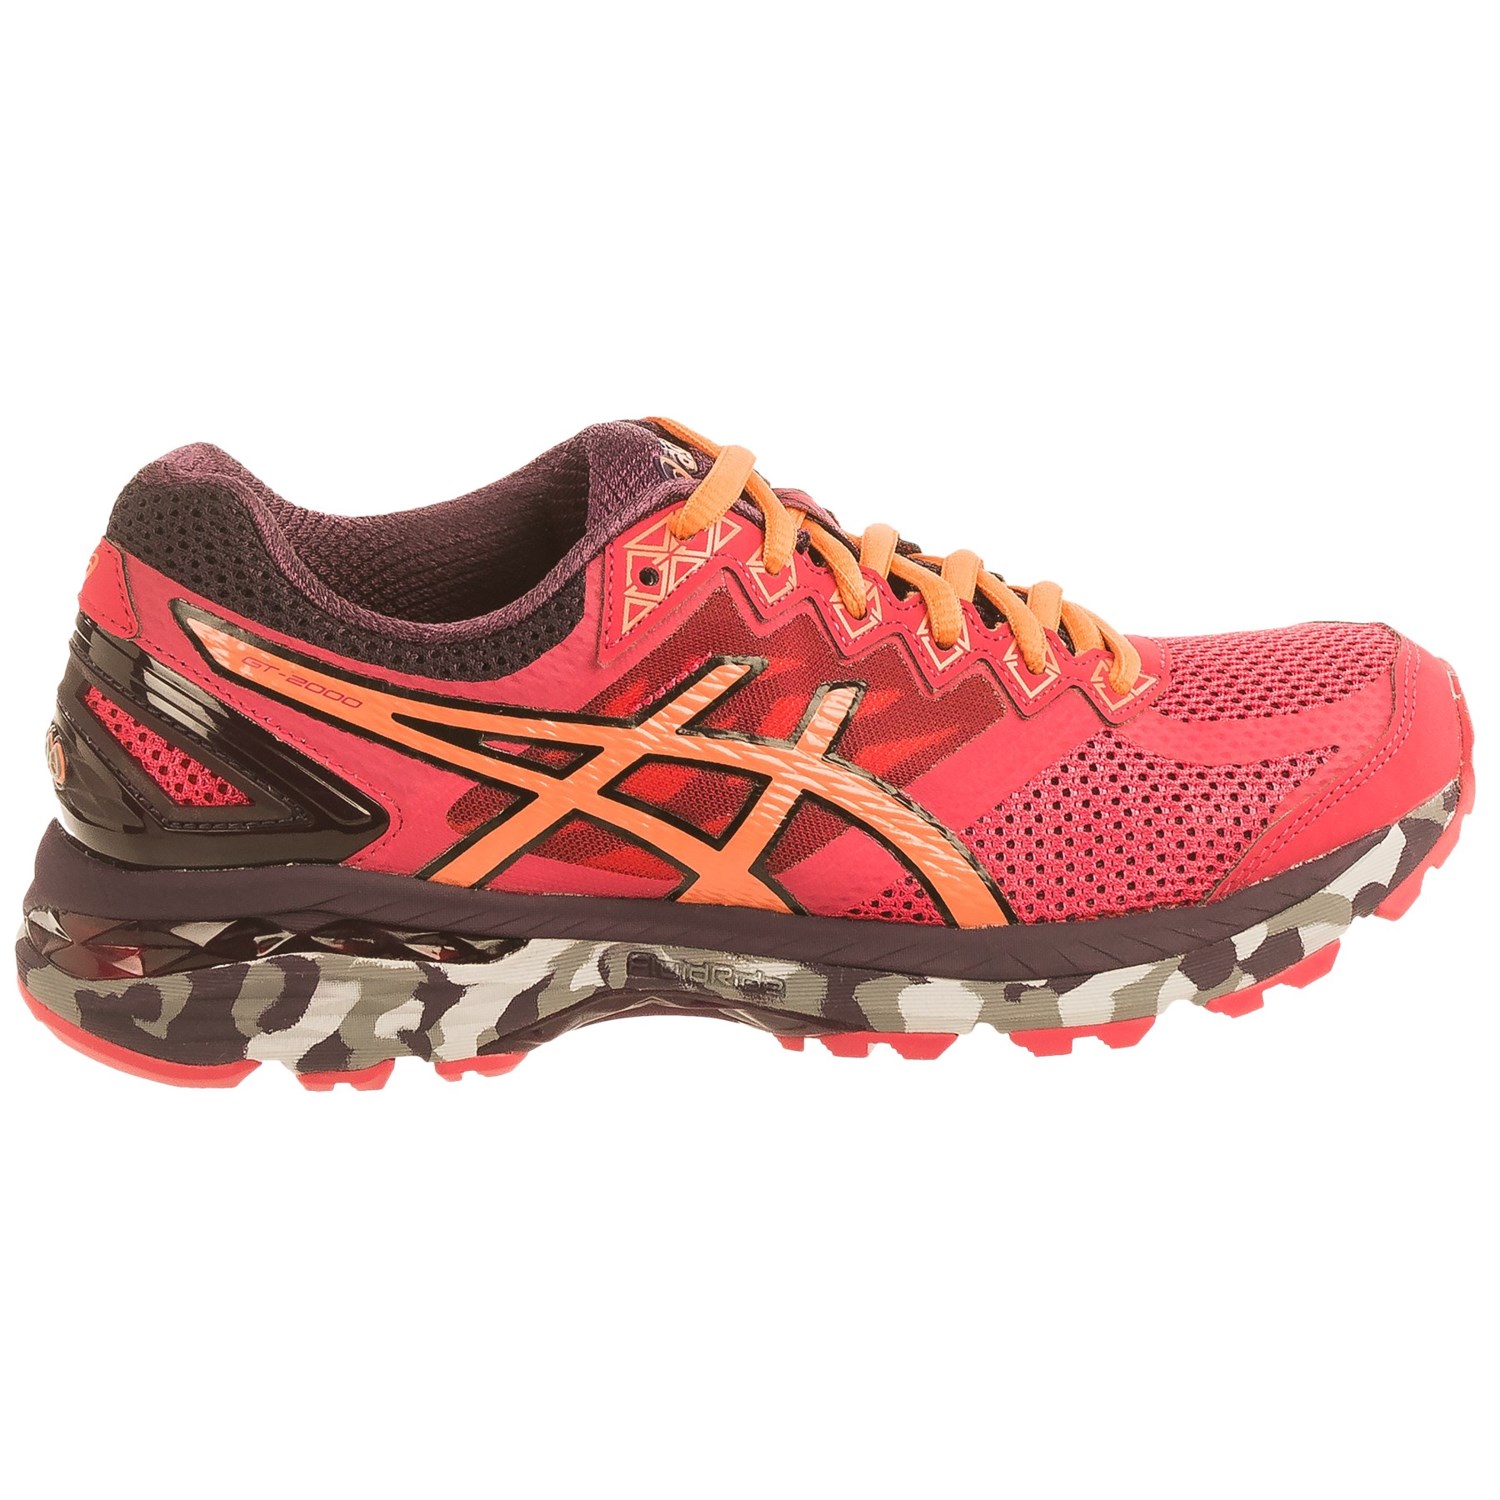 ASICS GT-2000 4 Trail Running Shoes (For Women) - Save 41%